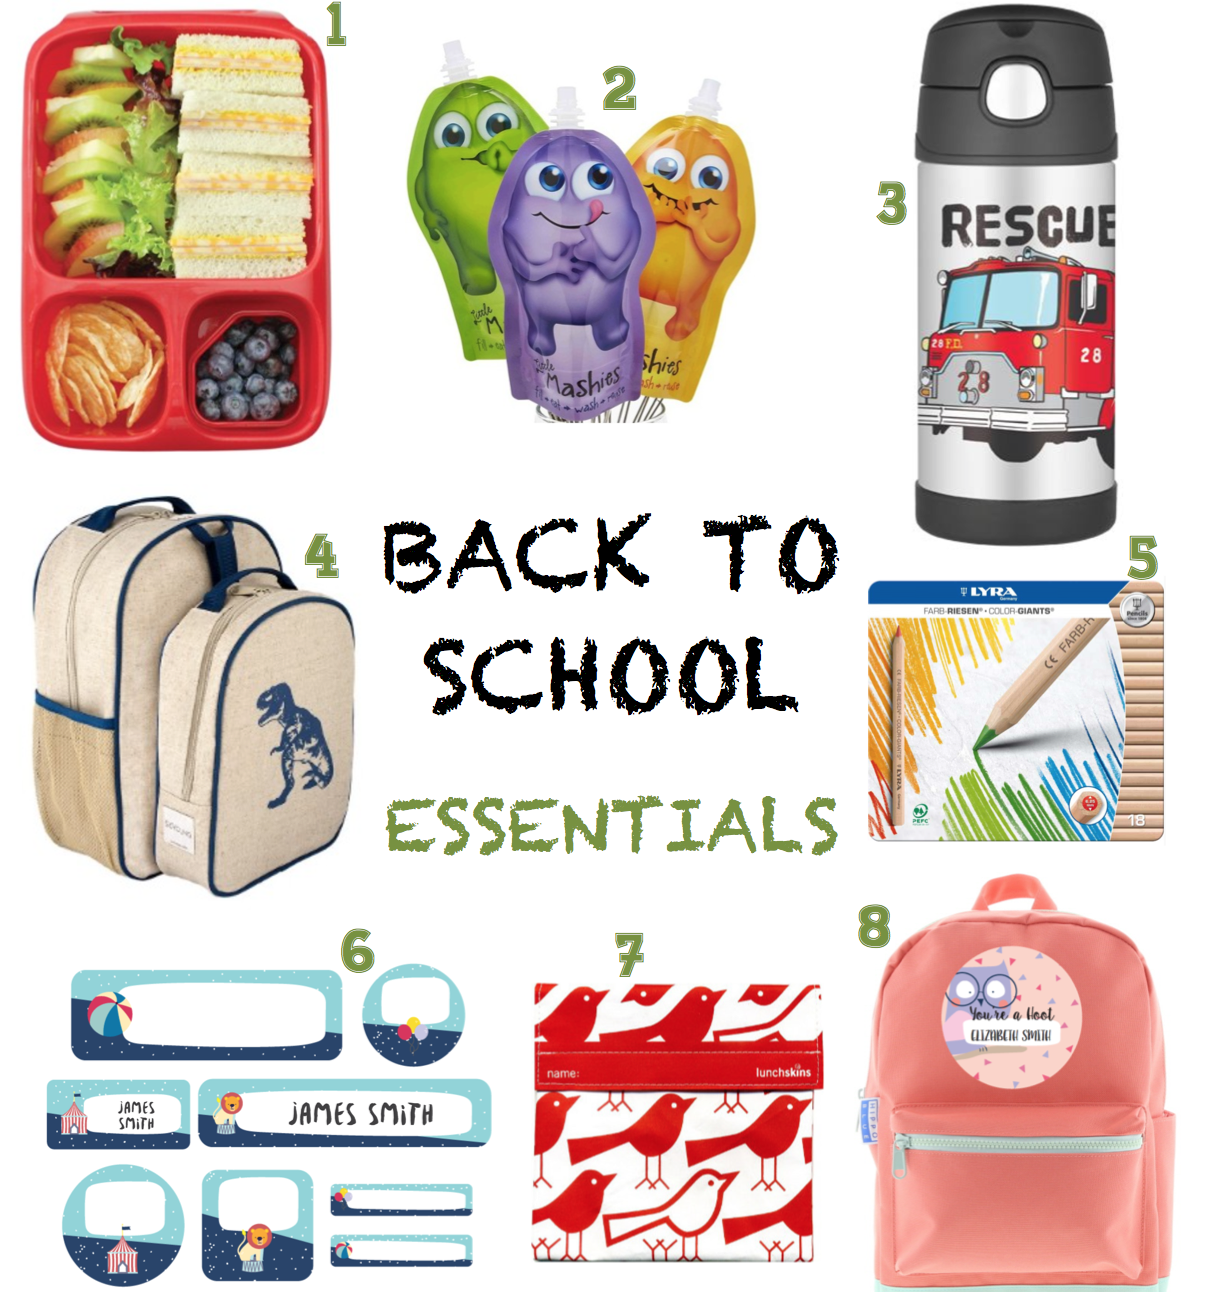 Back to School- Home Learning Essentials